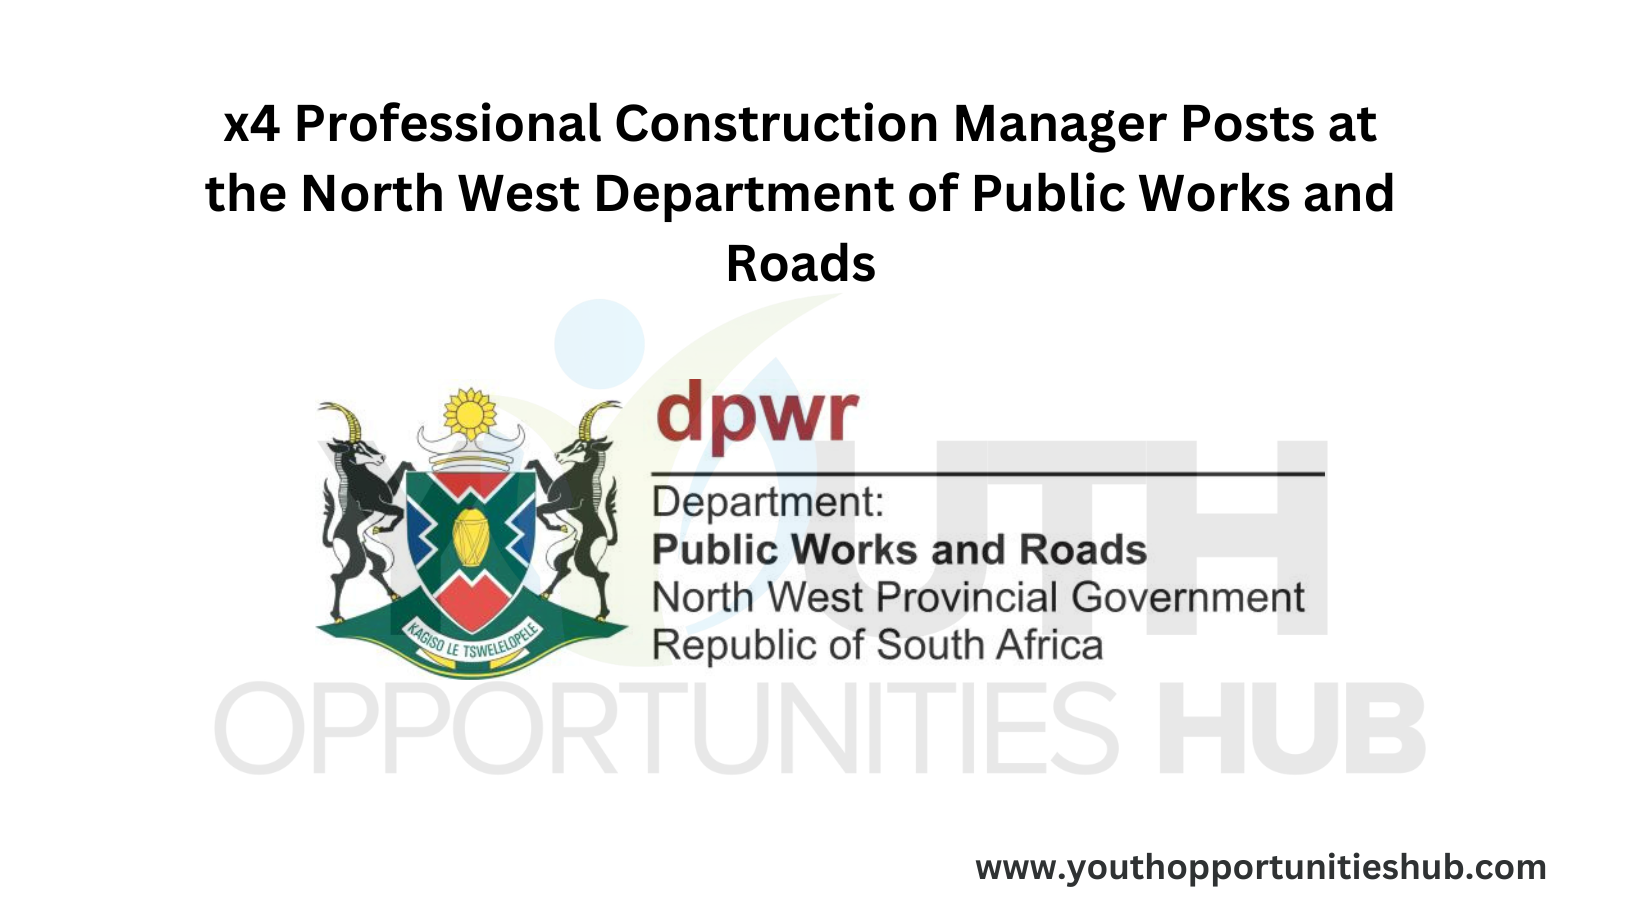 x4 Professional Construction Manager Posts at the North West Department